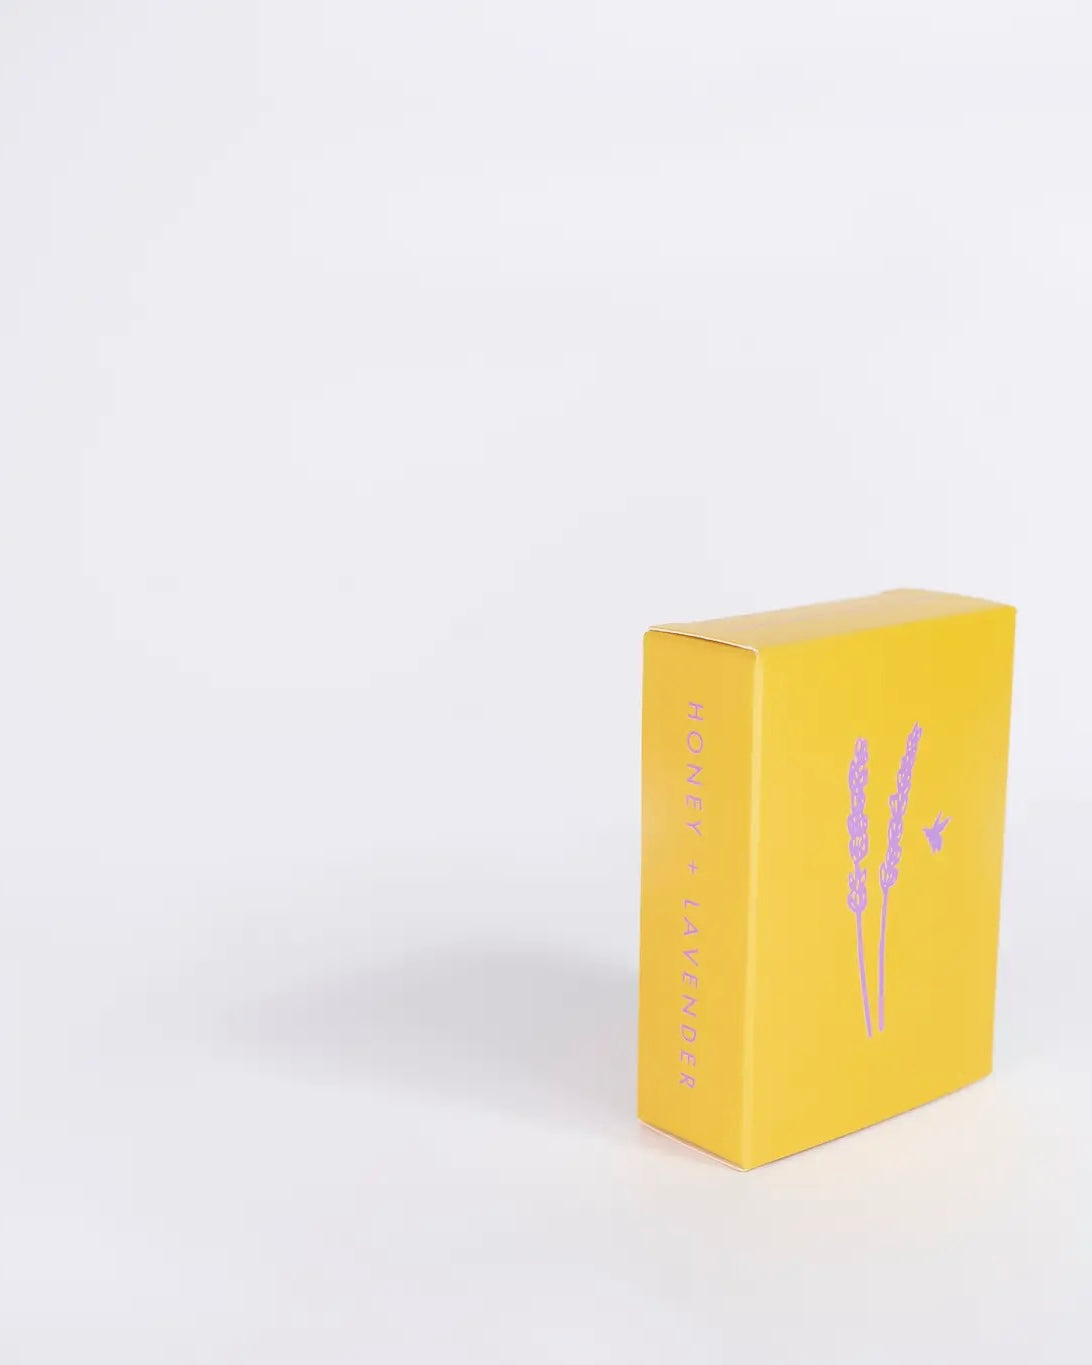 the ALTR Lavender & Honey Bar Soap in its box sitting on an angle against a neutral background